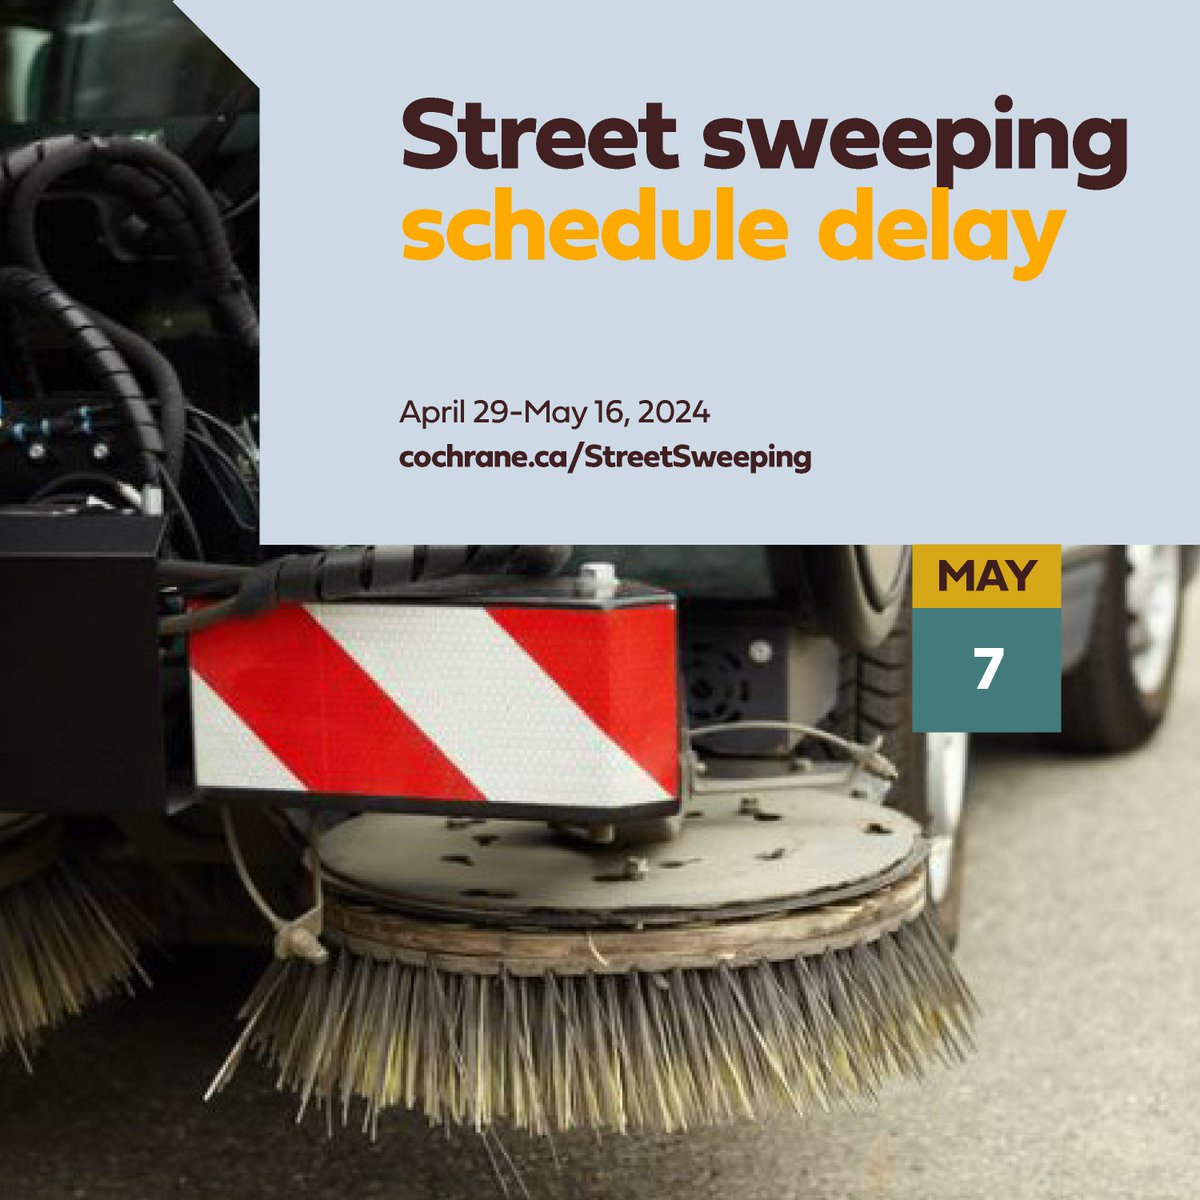 Due to weather, street sweeping originally planned for May 7 will be postponed to a later date.

Stay tuned for the rescheduled dates for Gleneagles West
Glen Vista to Gleneagles Drive. We apologize for any inconvenience this may cause. Thank you for your understanding.